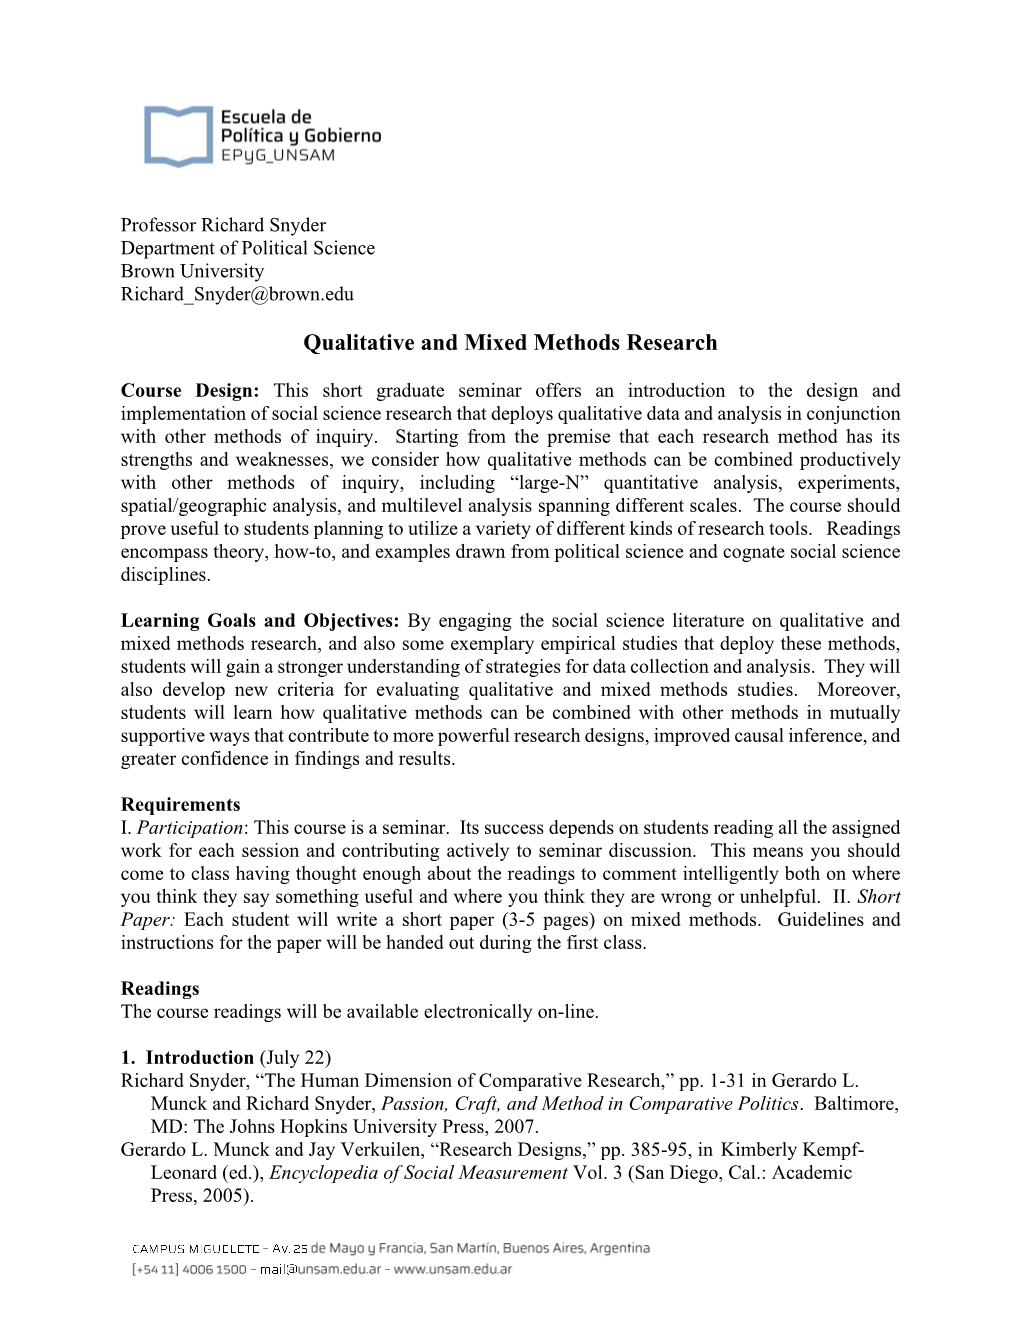 Qualitative and Mixed Methods Research